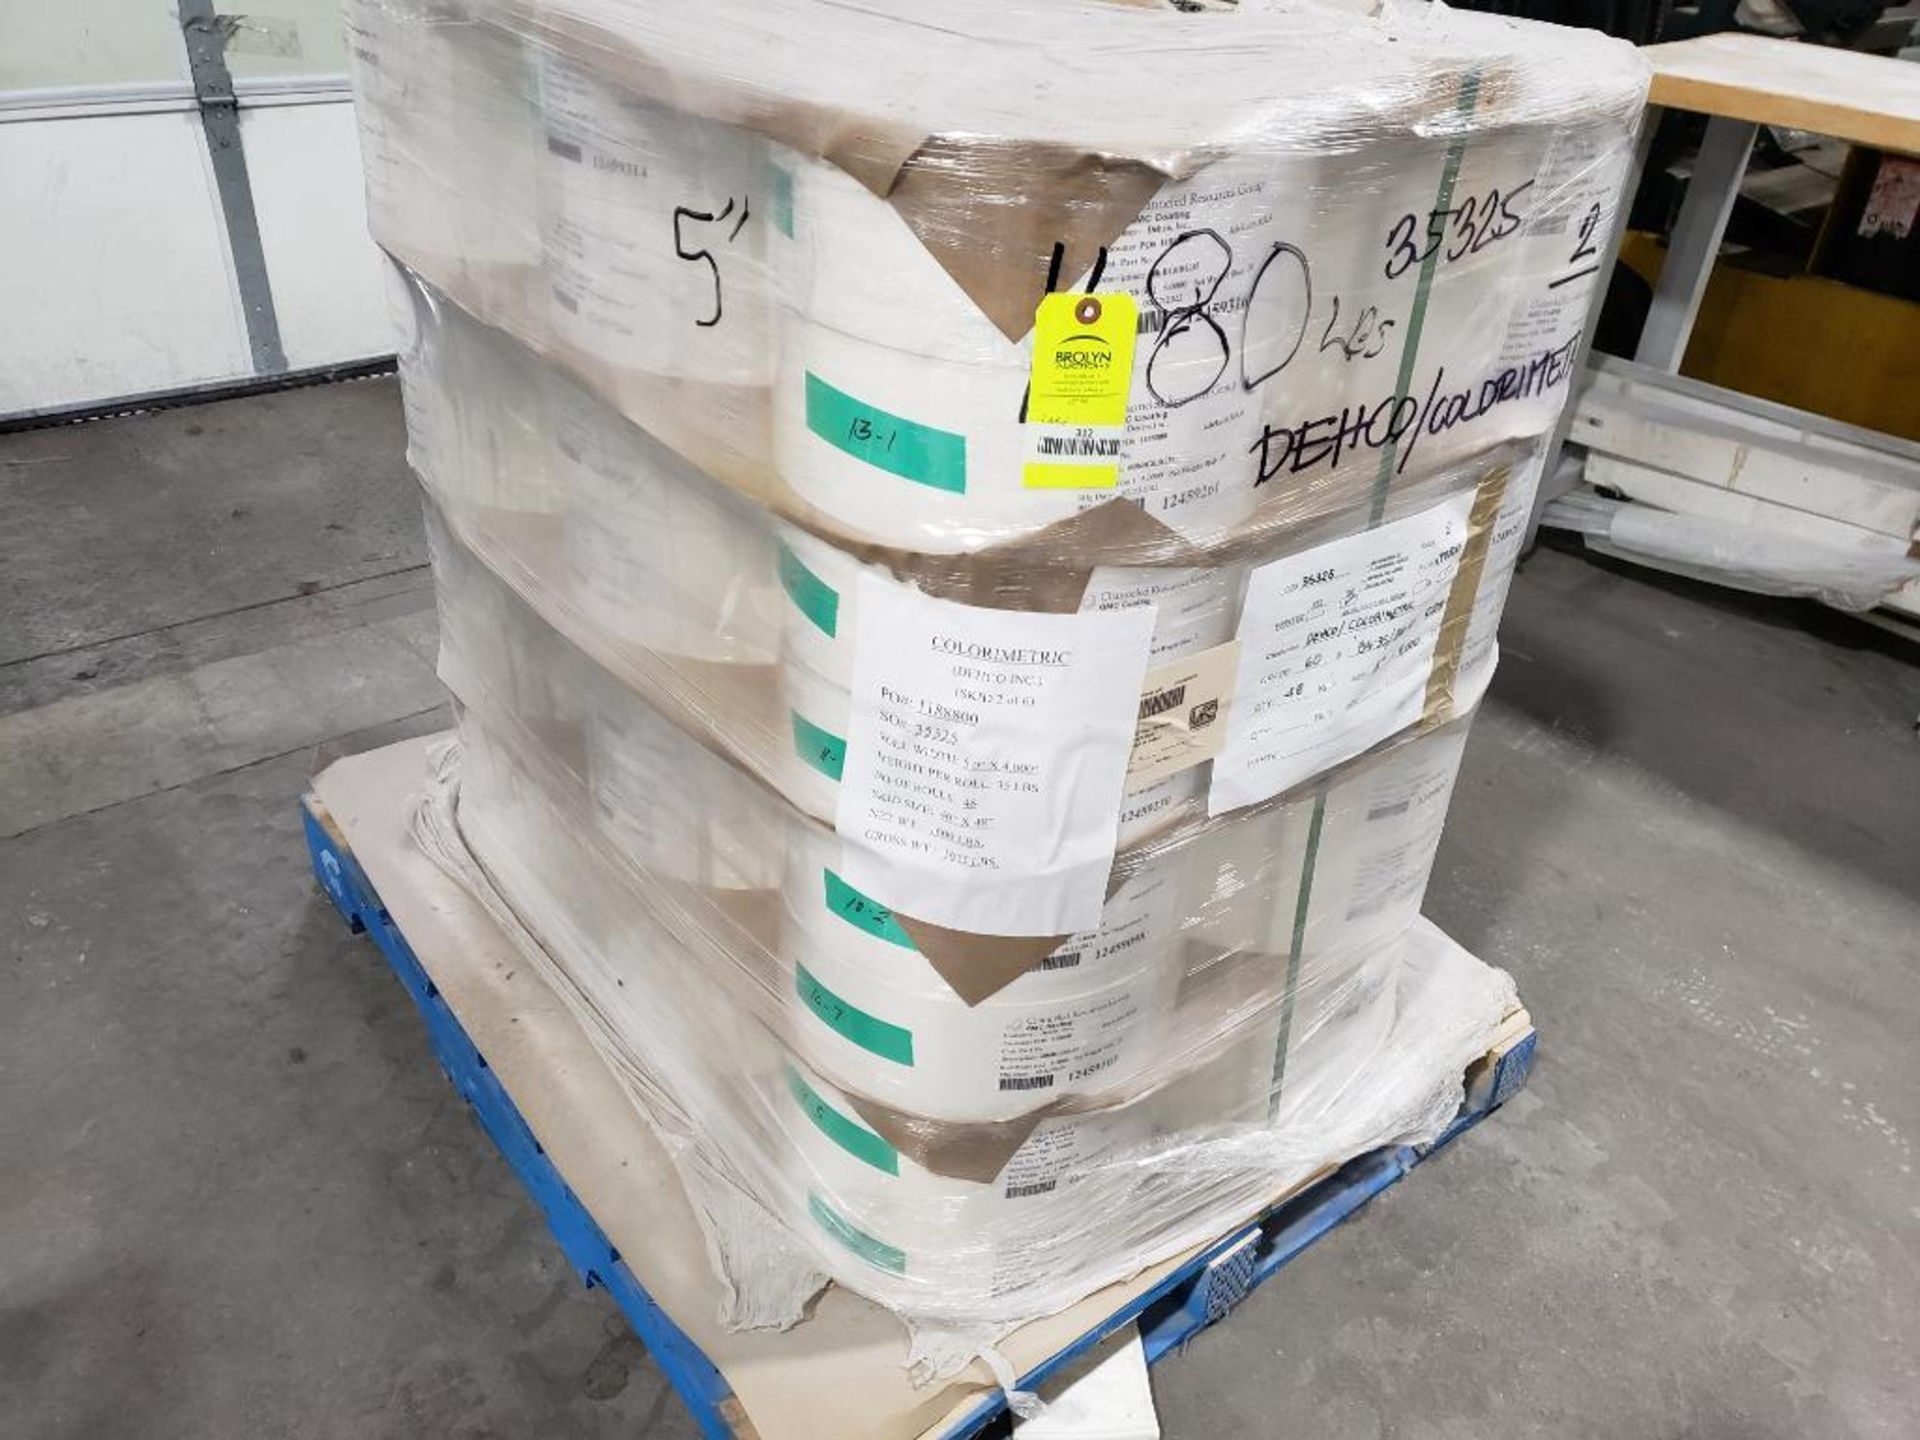 Pallet of backer paper. Large qty of rolls. Could be used for packing material.